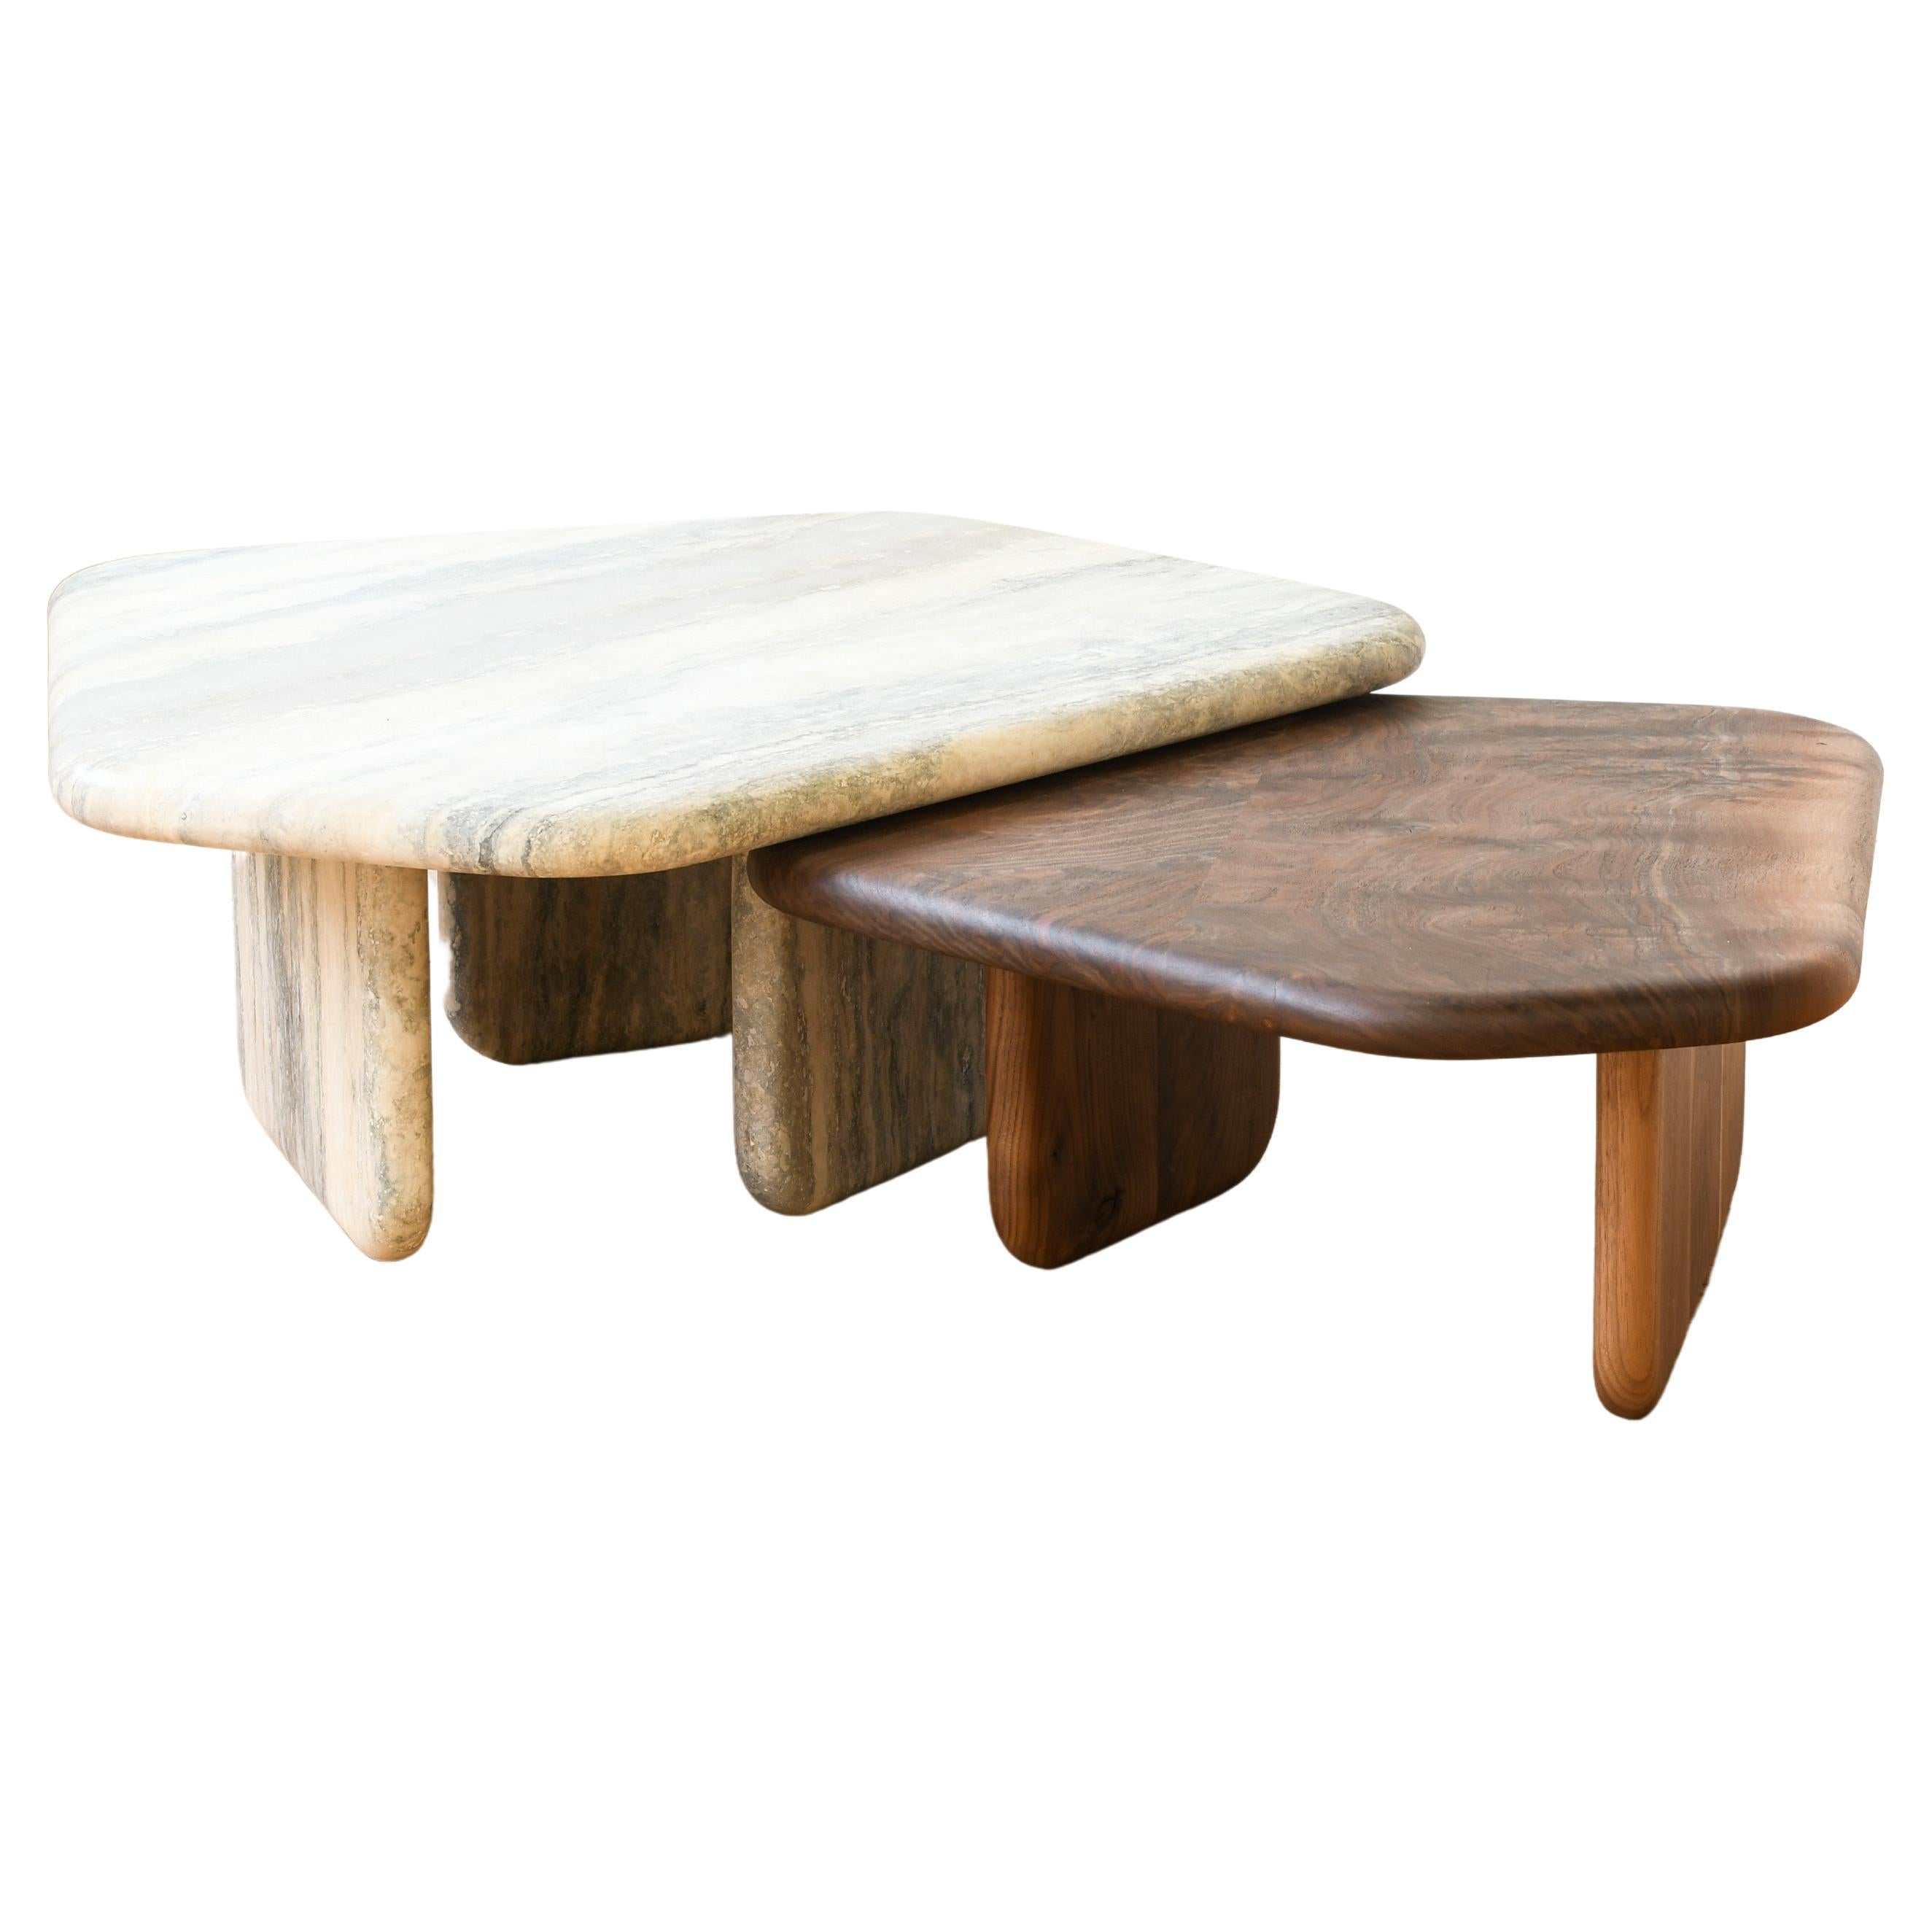 Dolmen Table pair in Silver Travertine and Claro Walnut by Jeff Martin Joinery